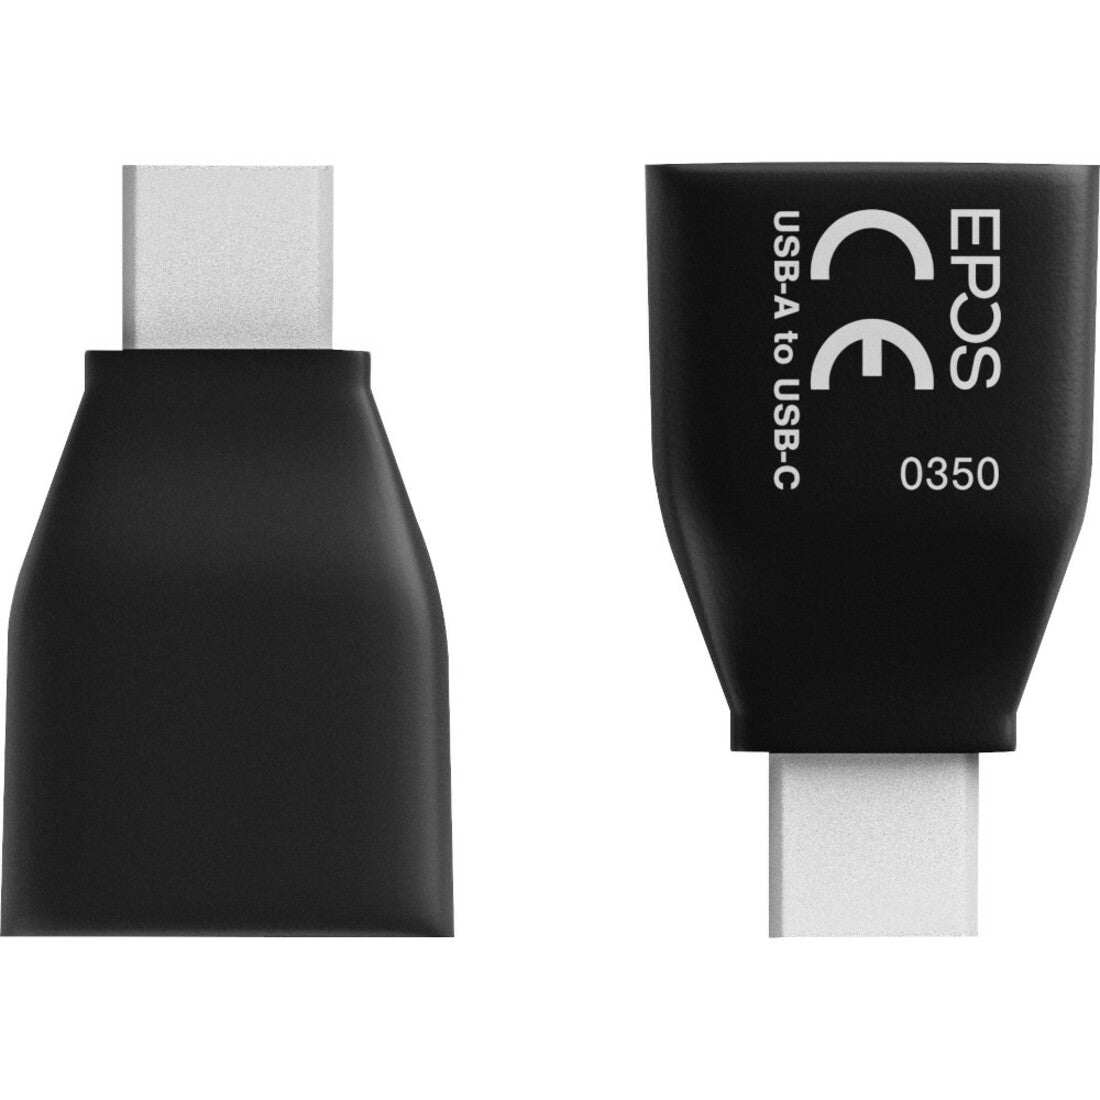 EPOS USB-A to USB-C Adapter Cable for Headset [Discontinued]